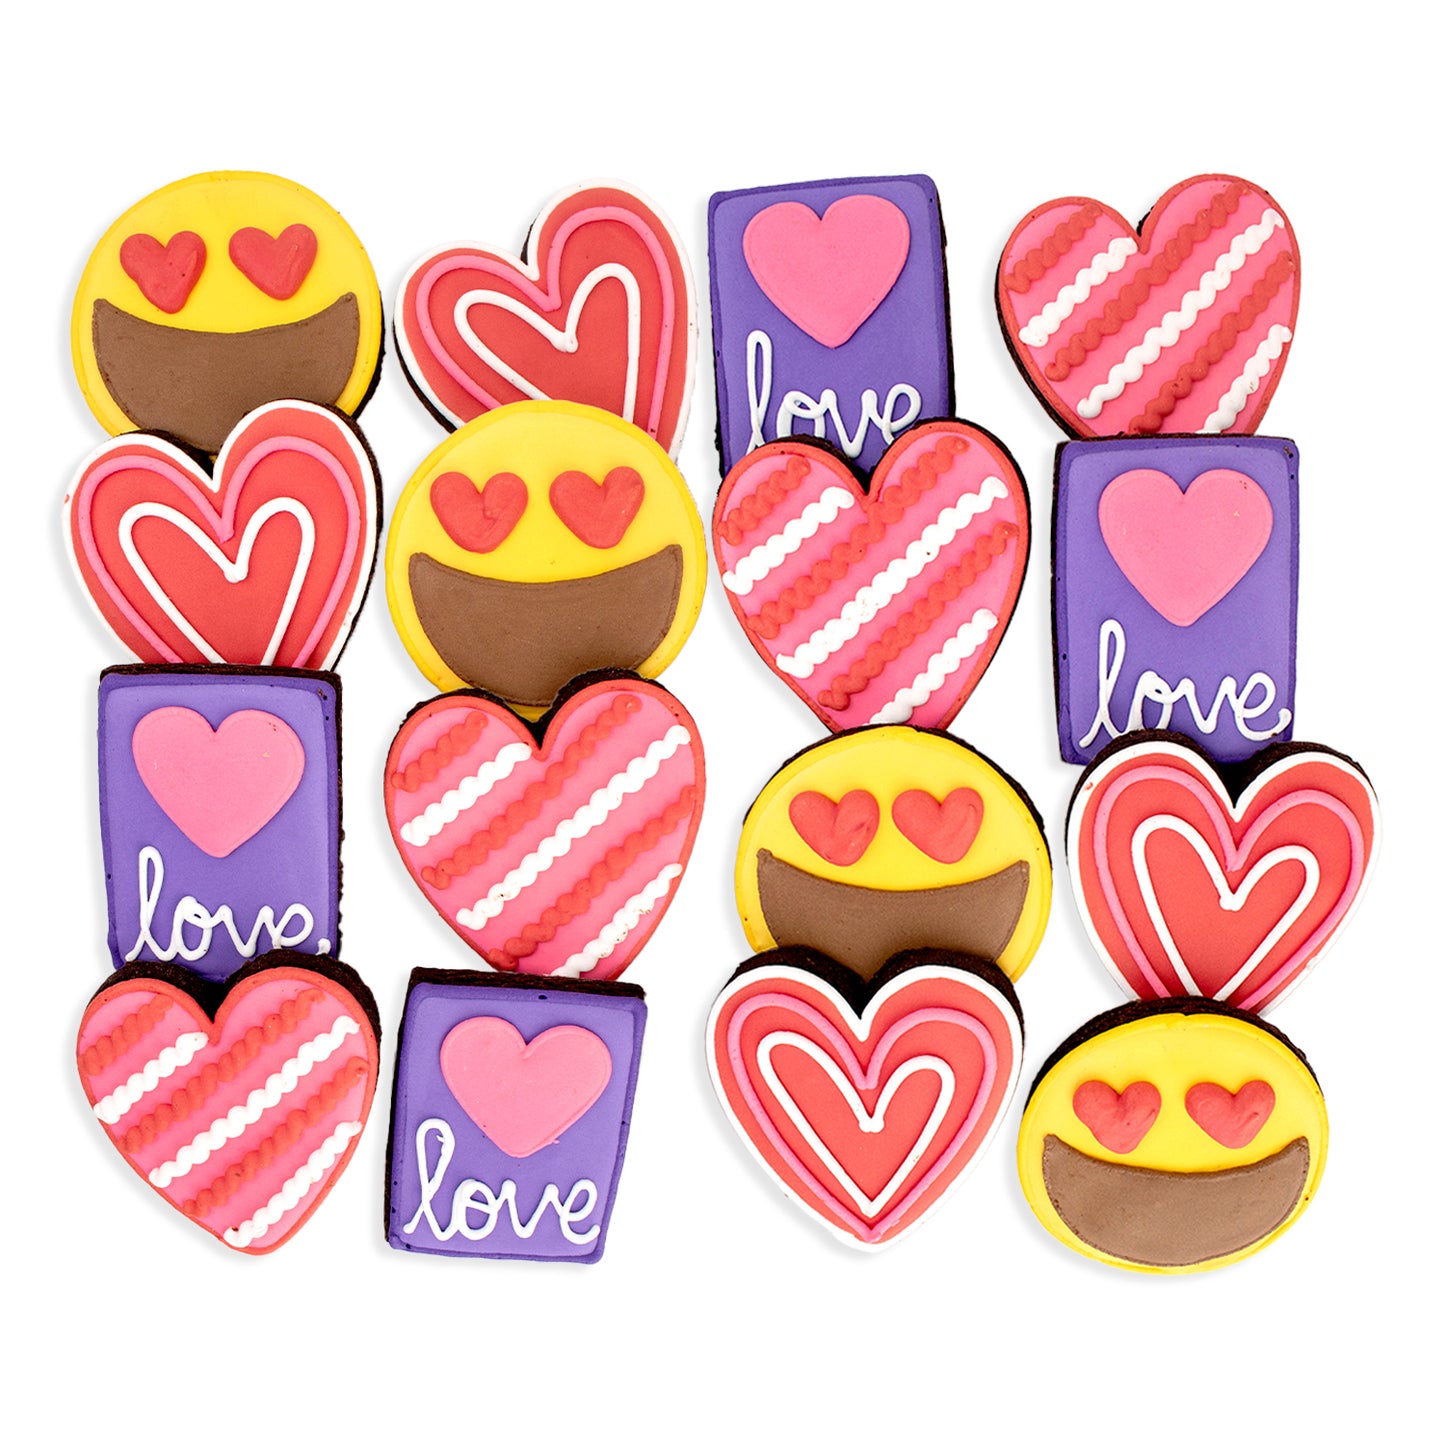 Valentine's Day Hand-Decorated Chocolate Cookies - 16 ct